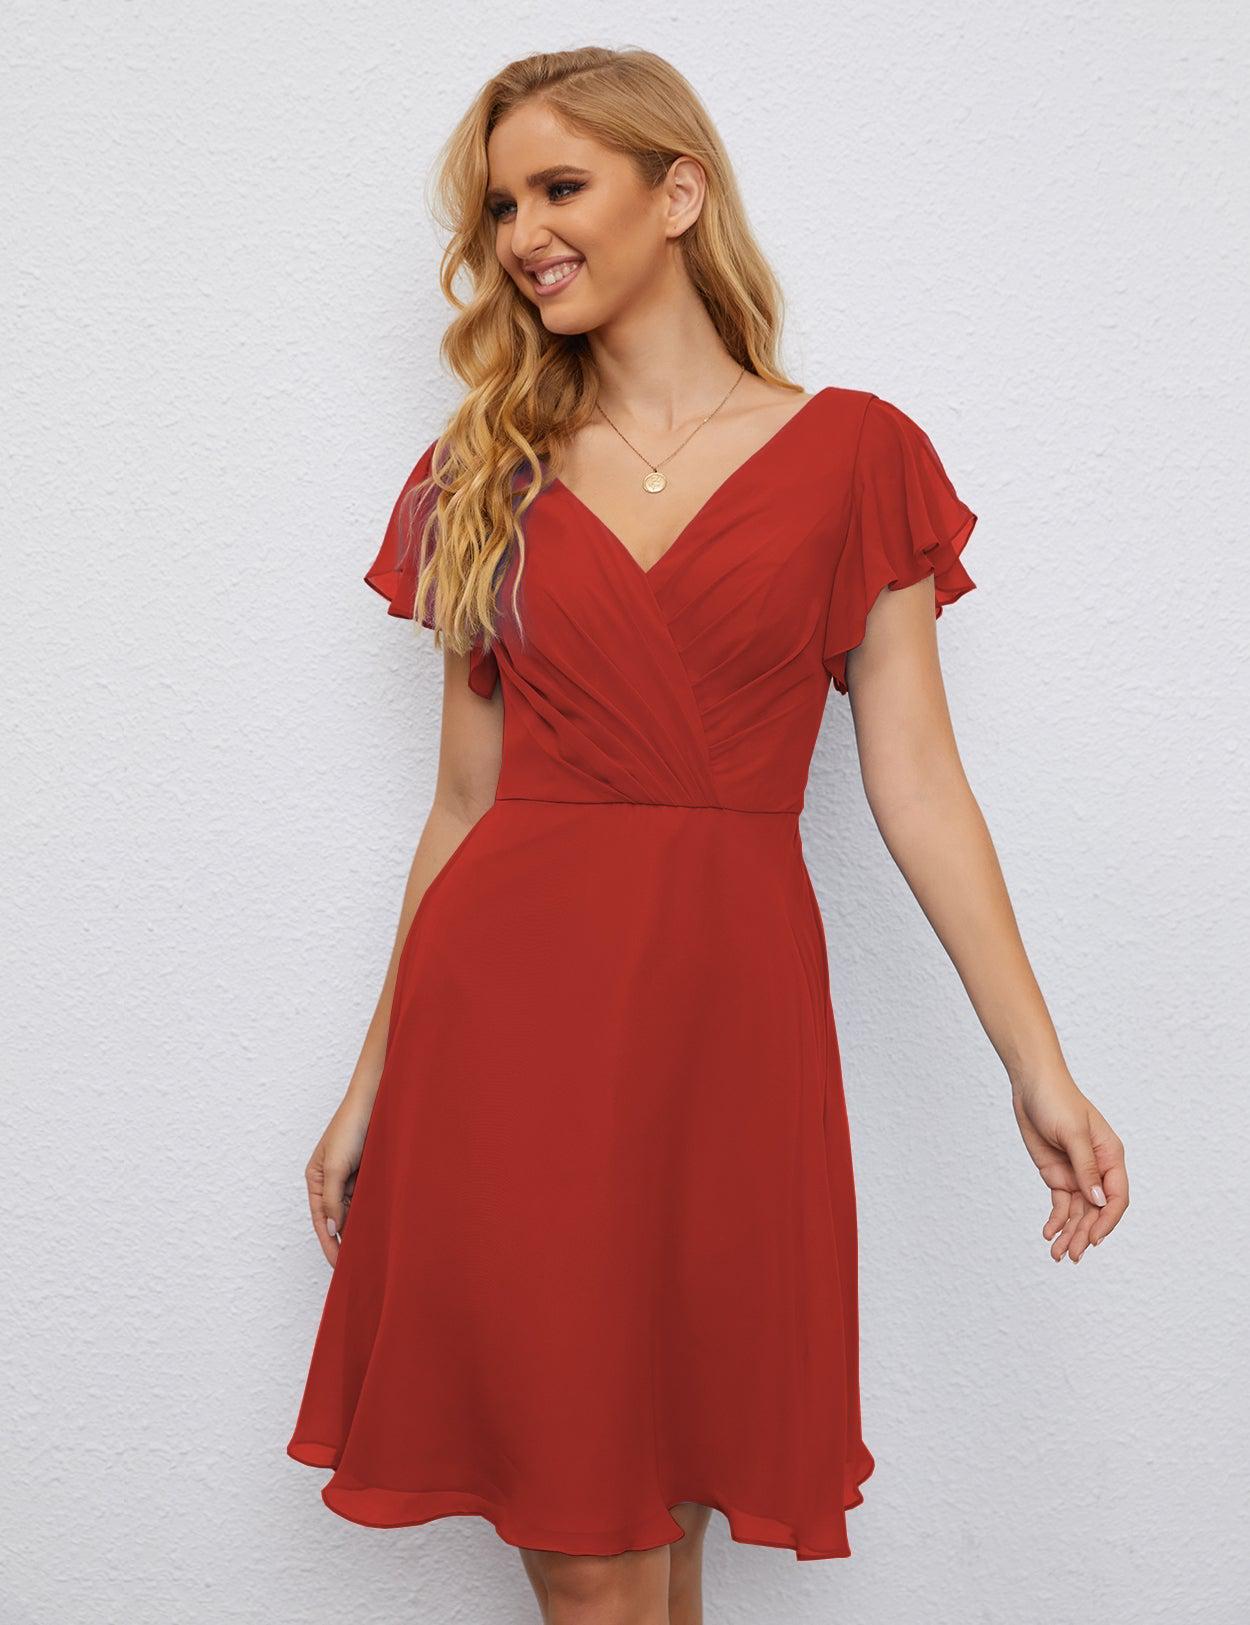 Numbersea Chiffon Bridesmaid Dress V Neck Short Cocktail Gowns For Juniors Homecoming Dresses 28077